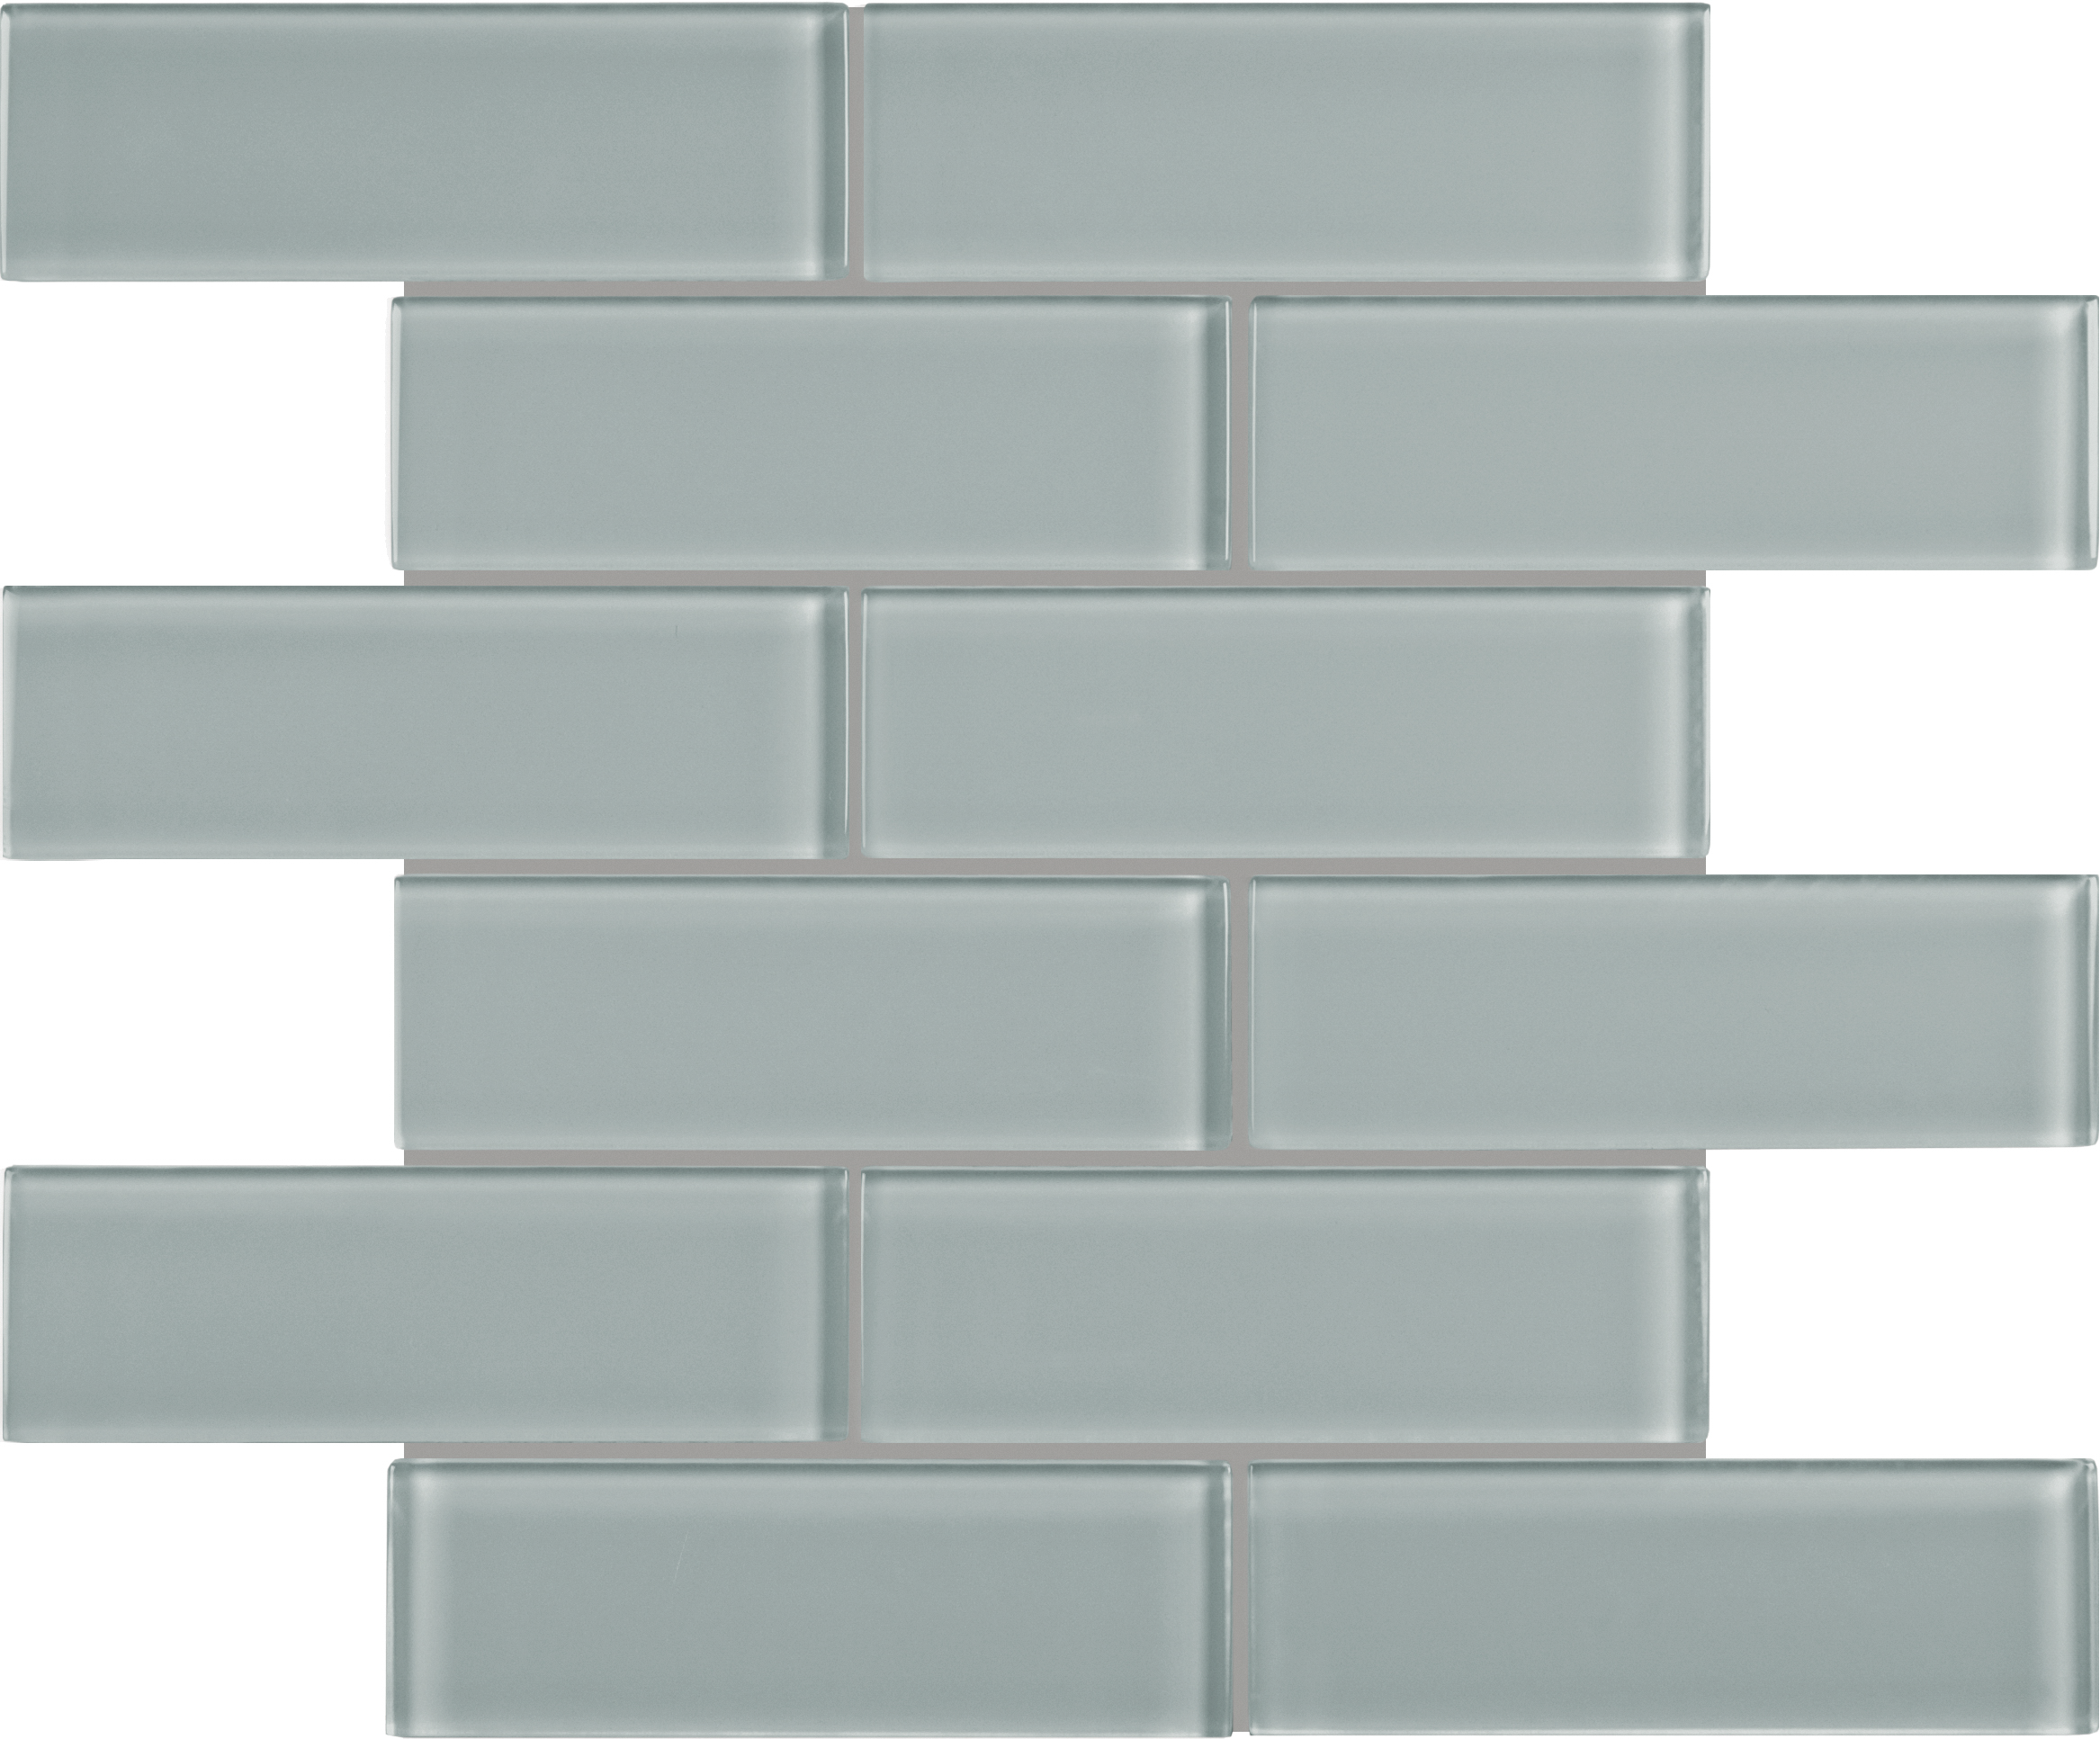 shadow brick offset 2x6-inch pattern fused glass mosaic from element anatolia collection distributed by surface group international glossy finish rounded edge mesh shape